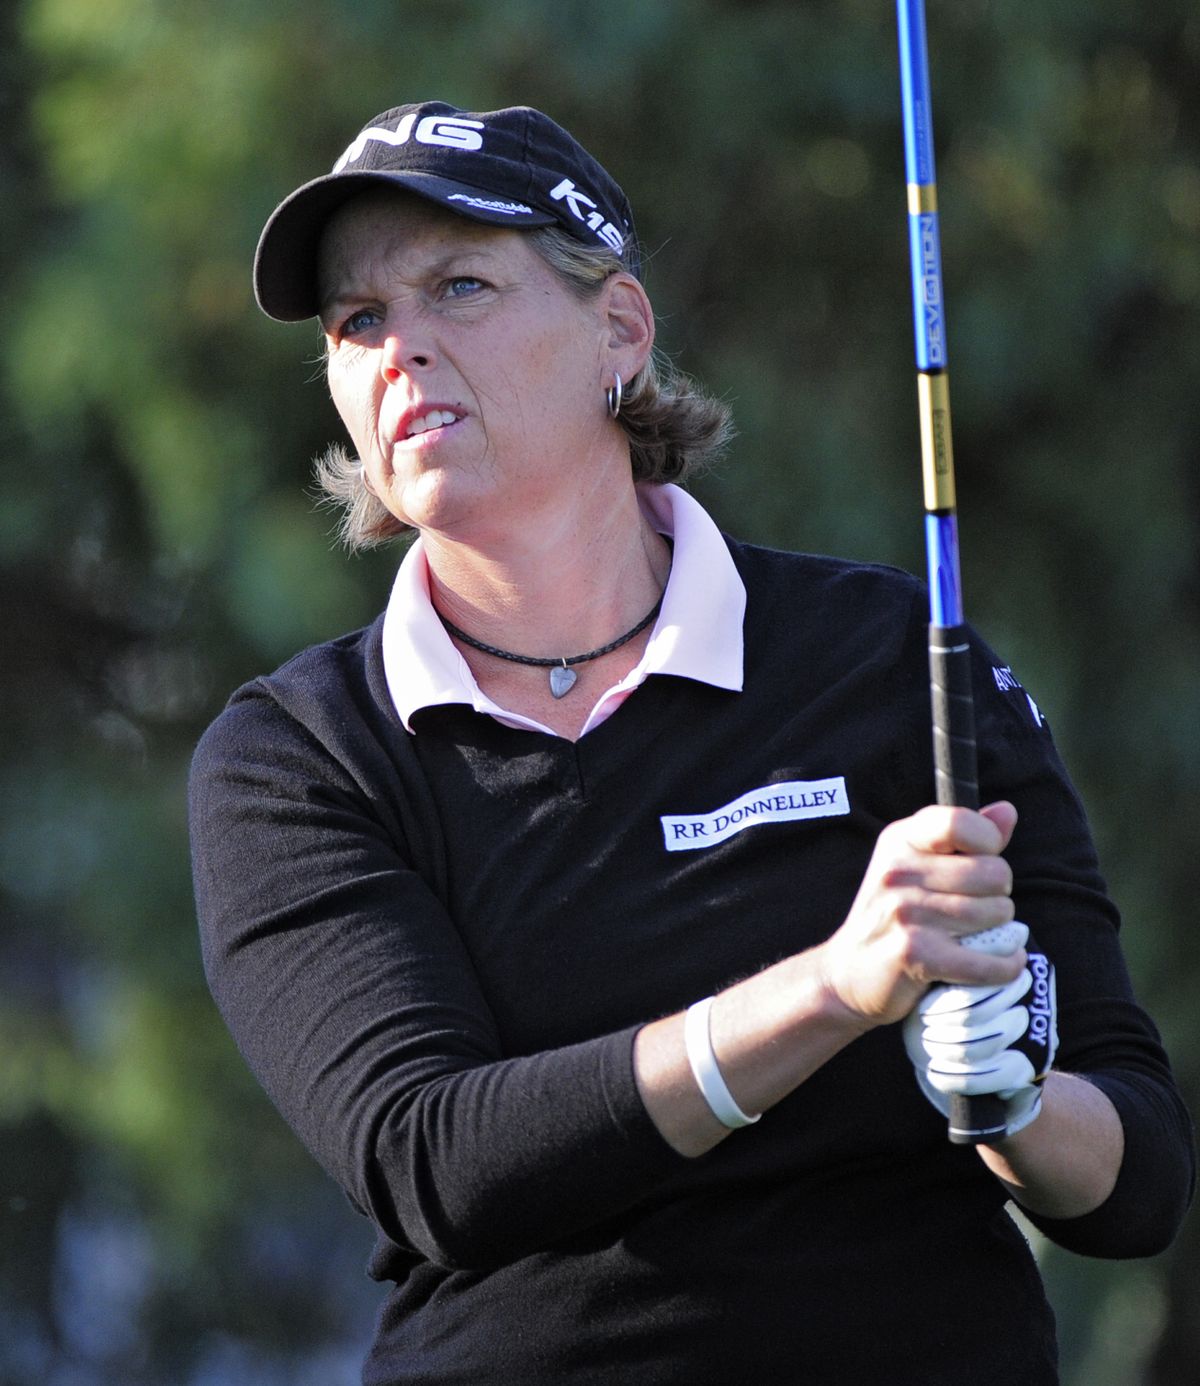 Wendy Ward of Edwall, Washington, played in the Solheim Cup three times. (Associated Press)